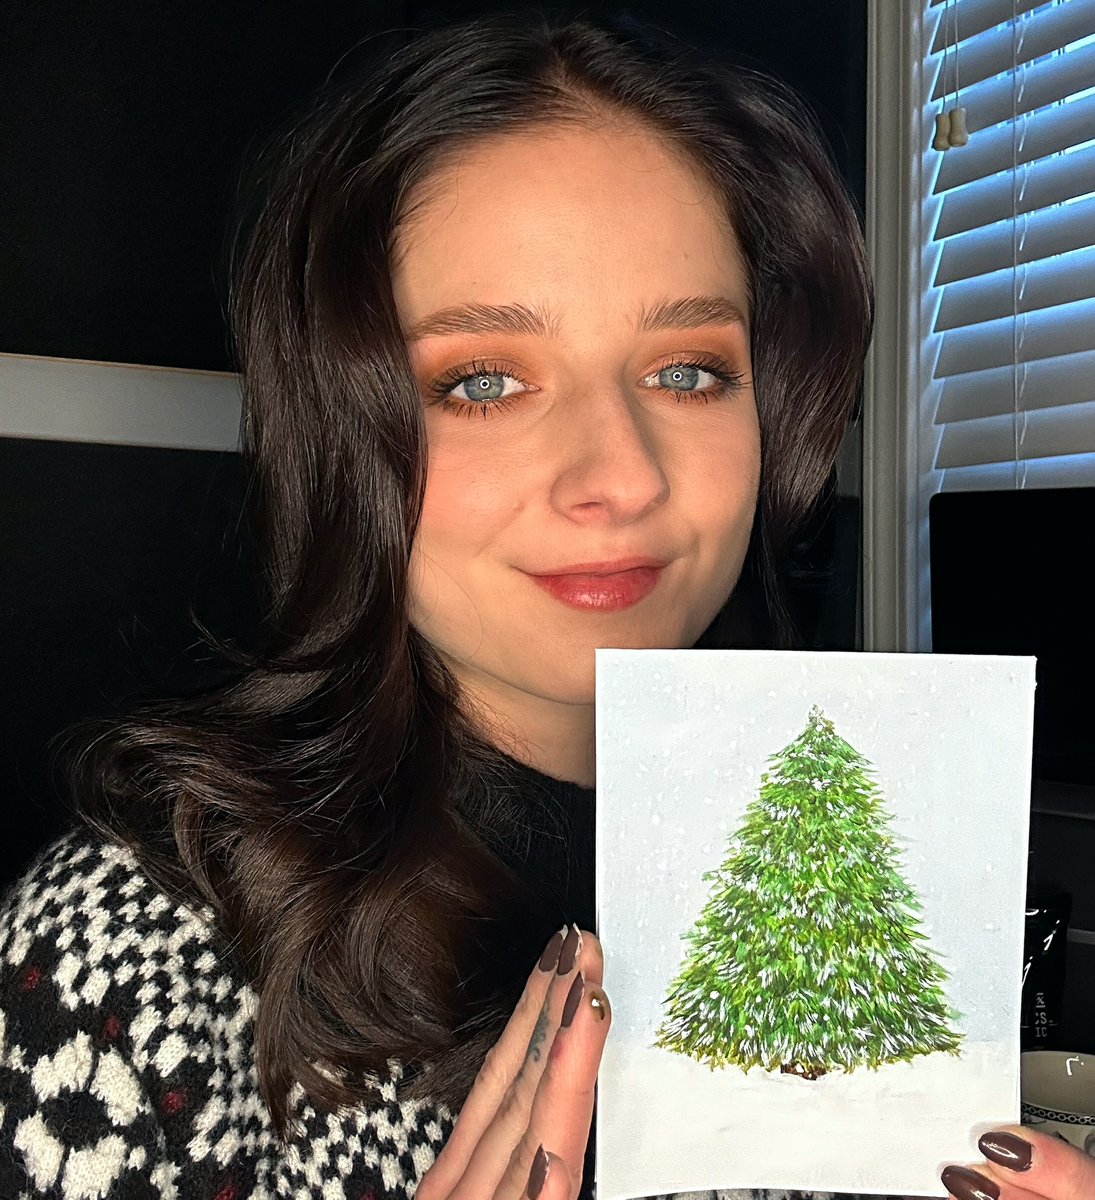 I love sharing my artwork, and I'll be sending this personalized holiday card to one of you! To enter, visit bit.ly/JEHolidayCardG…. 

Everyone who enters will also receive a digital holiday card from me. 🎄❤️ #HappyHolidays #HolidayGiveaway #MerryChristmas